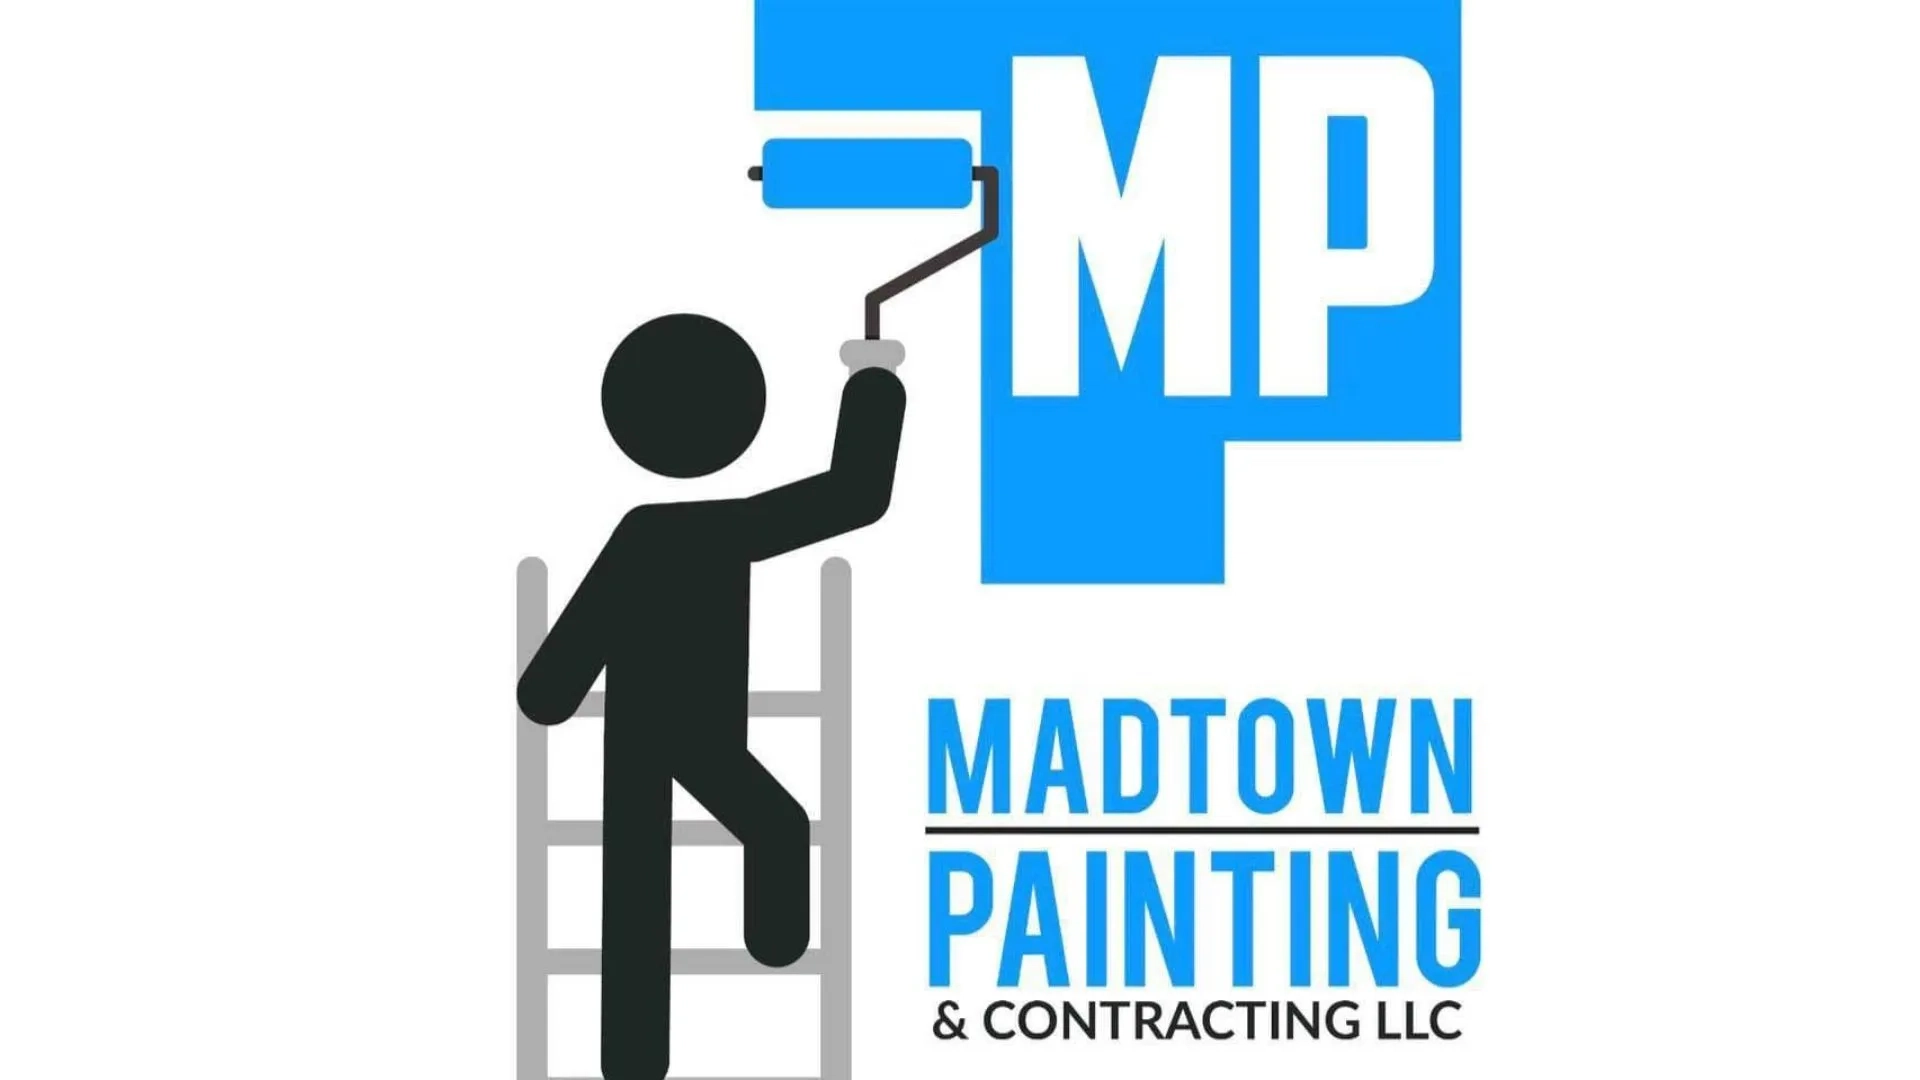 Madtown Painting & Contracting LLC Logo